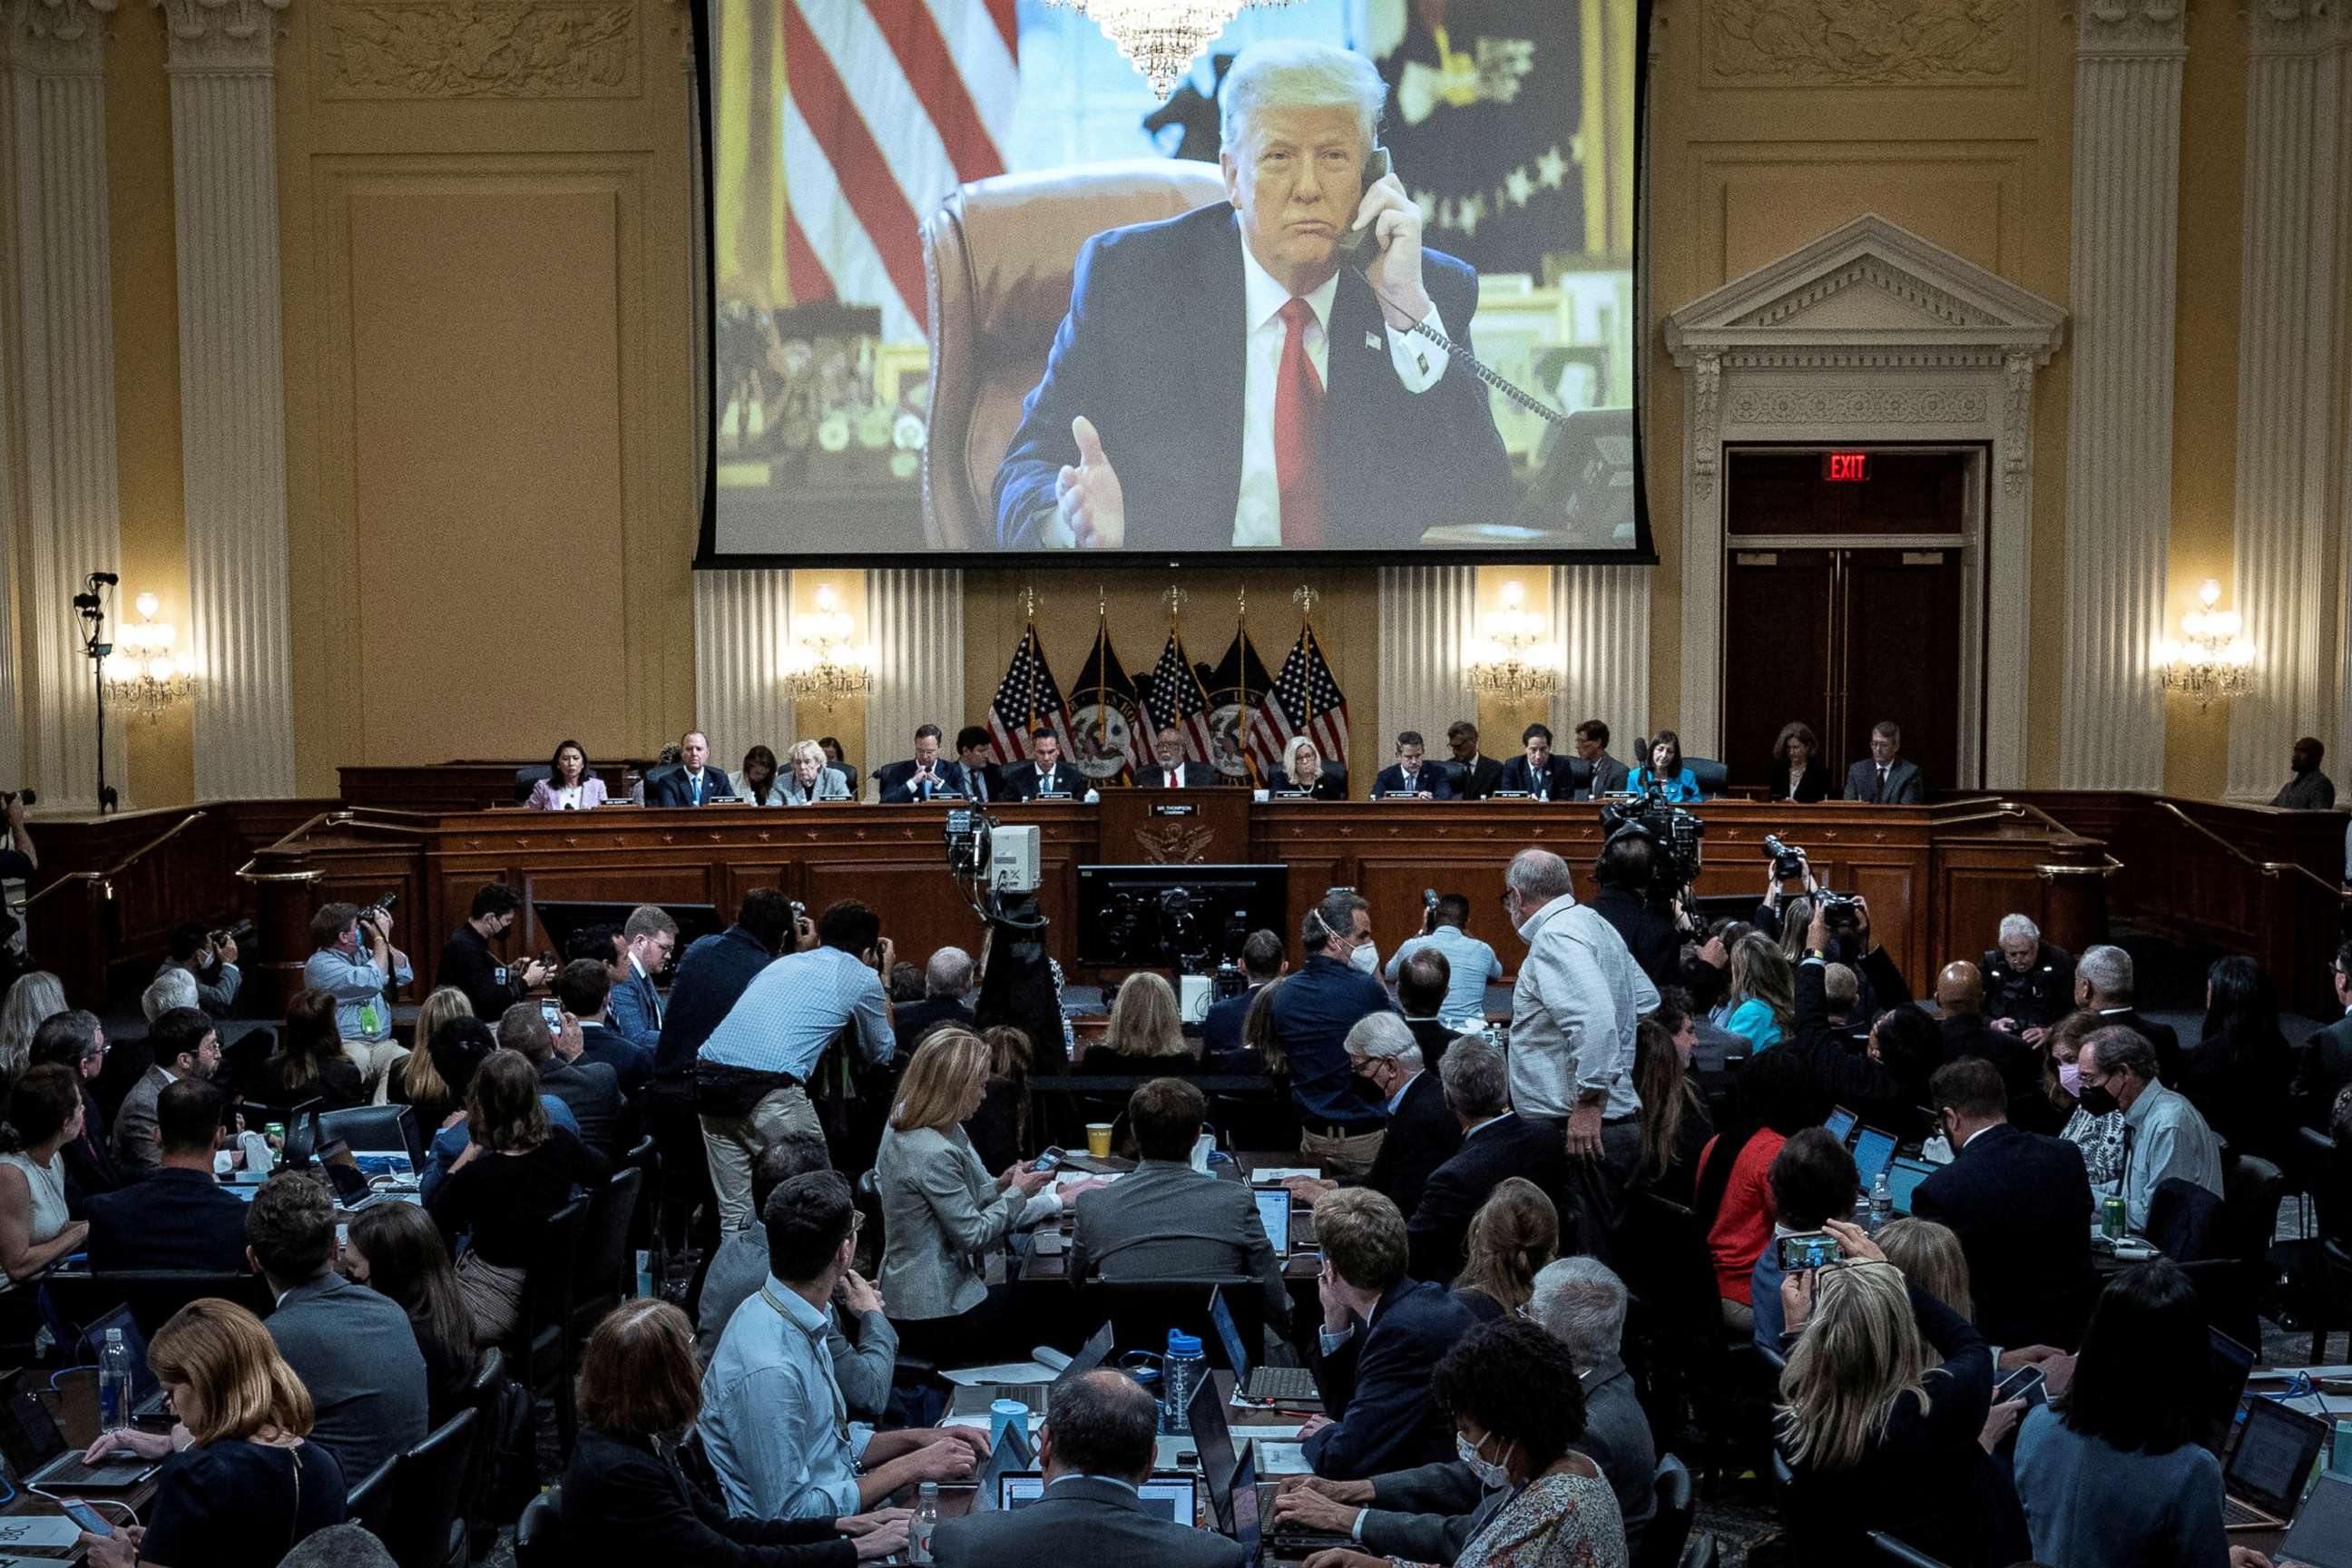 PHOTO: An image of former President Donald Trump is displayed during the third hearing of the House Select Committee to Investigate the January 6th Attack on the Capitol in the Cannon House Office Building, on Capitol Hill, June 16, 2022.